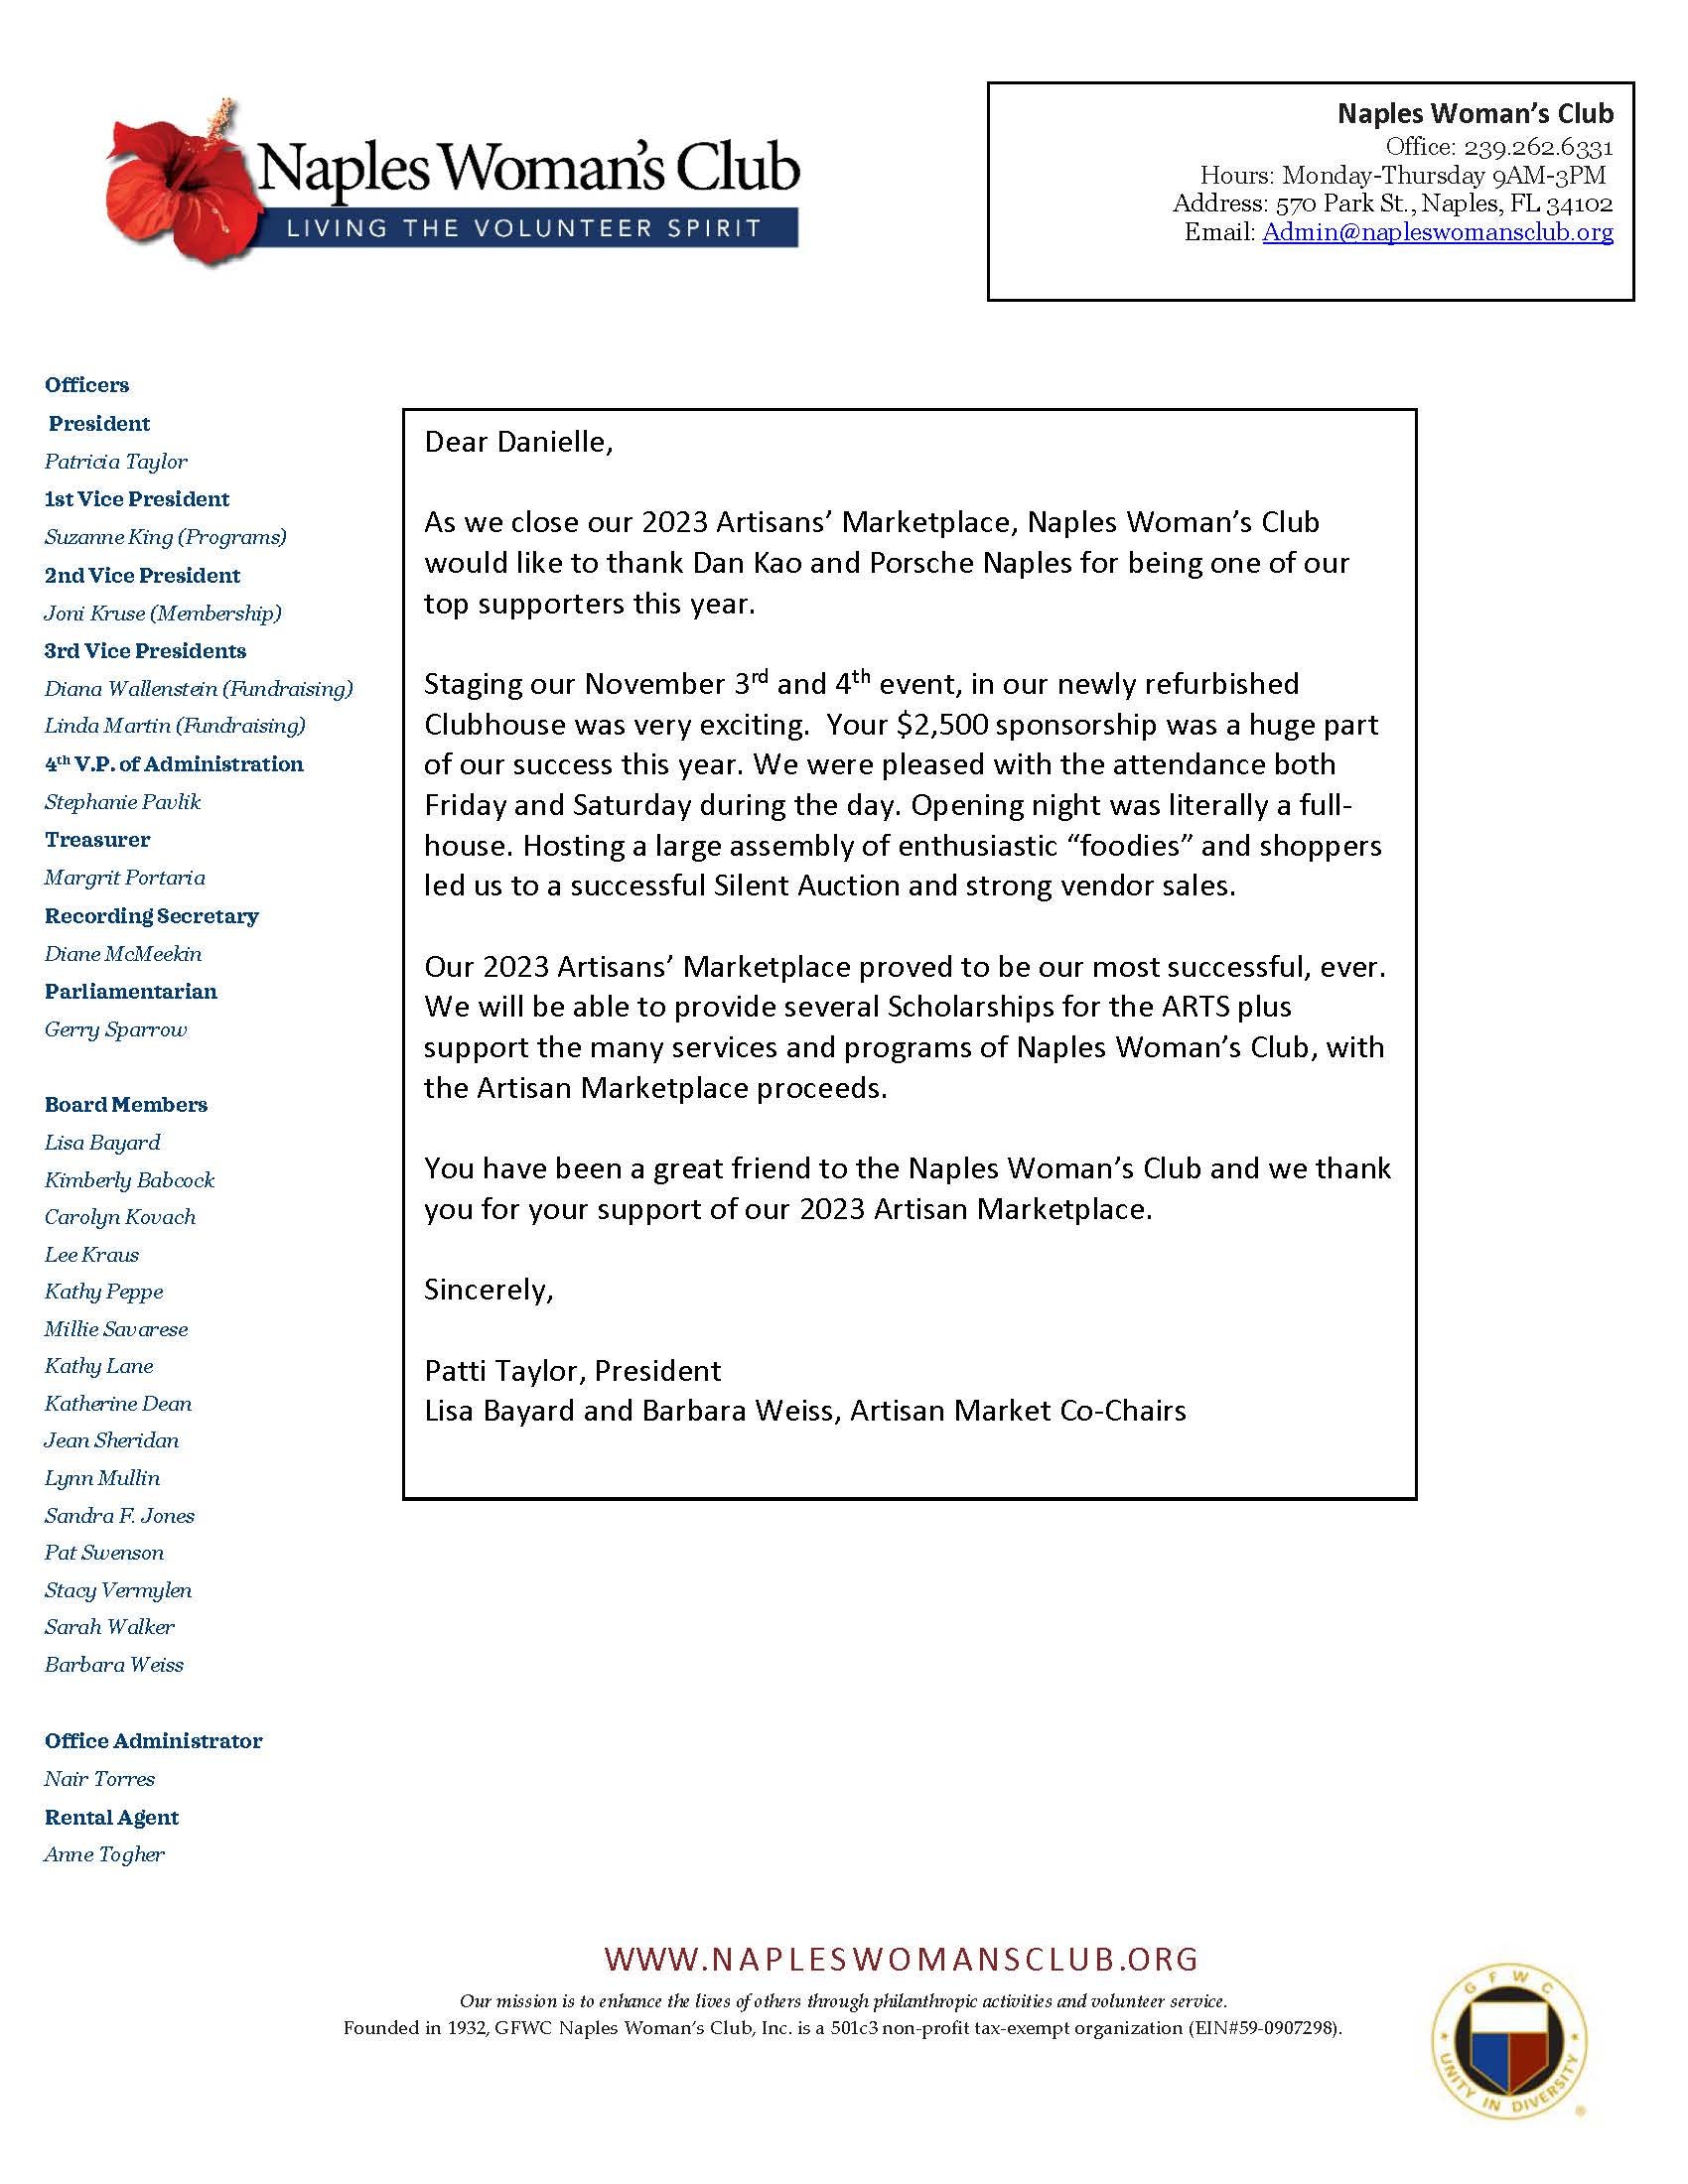 Naples Womens Club Thank you Letter